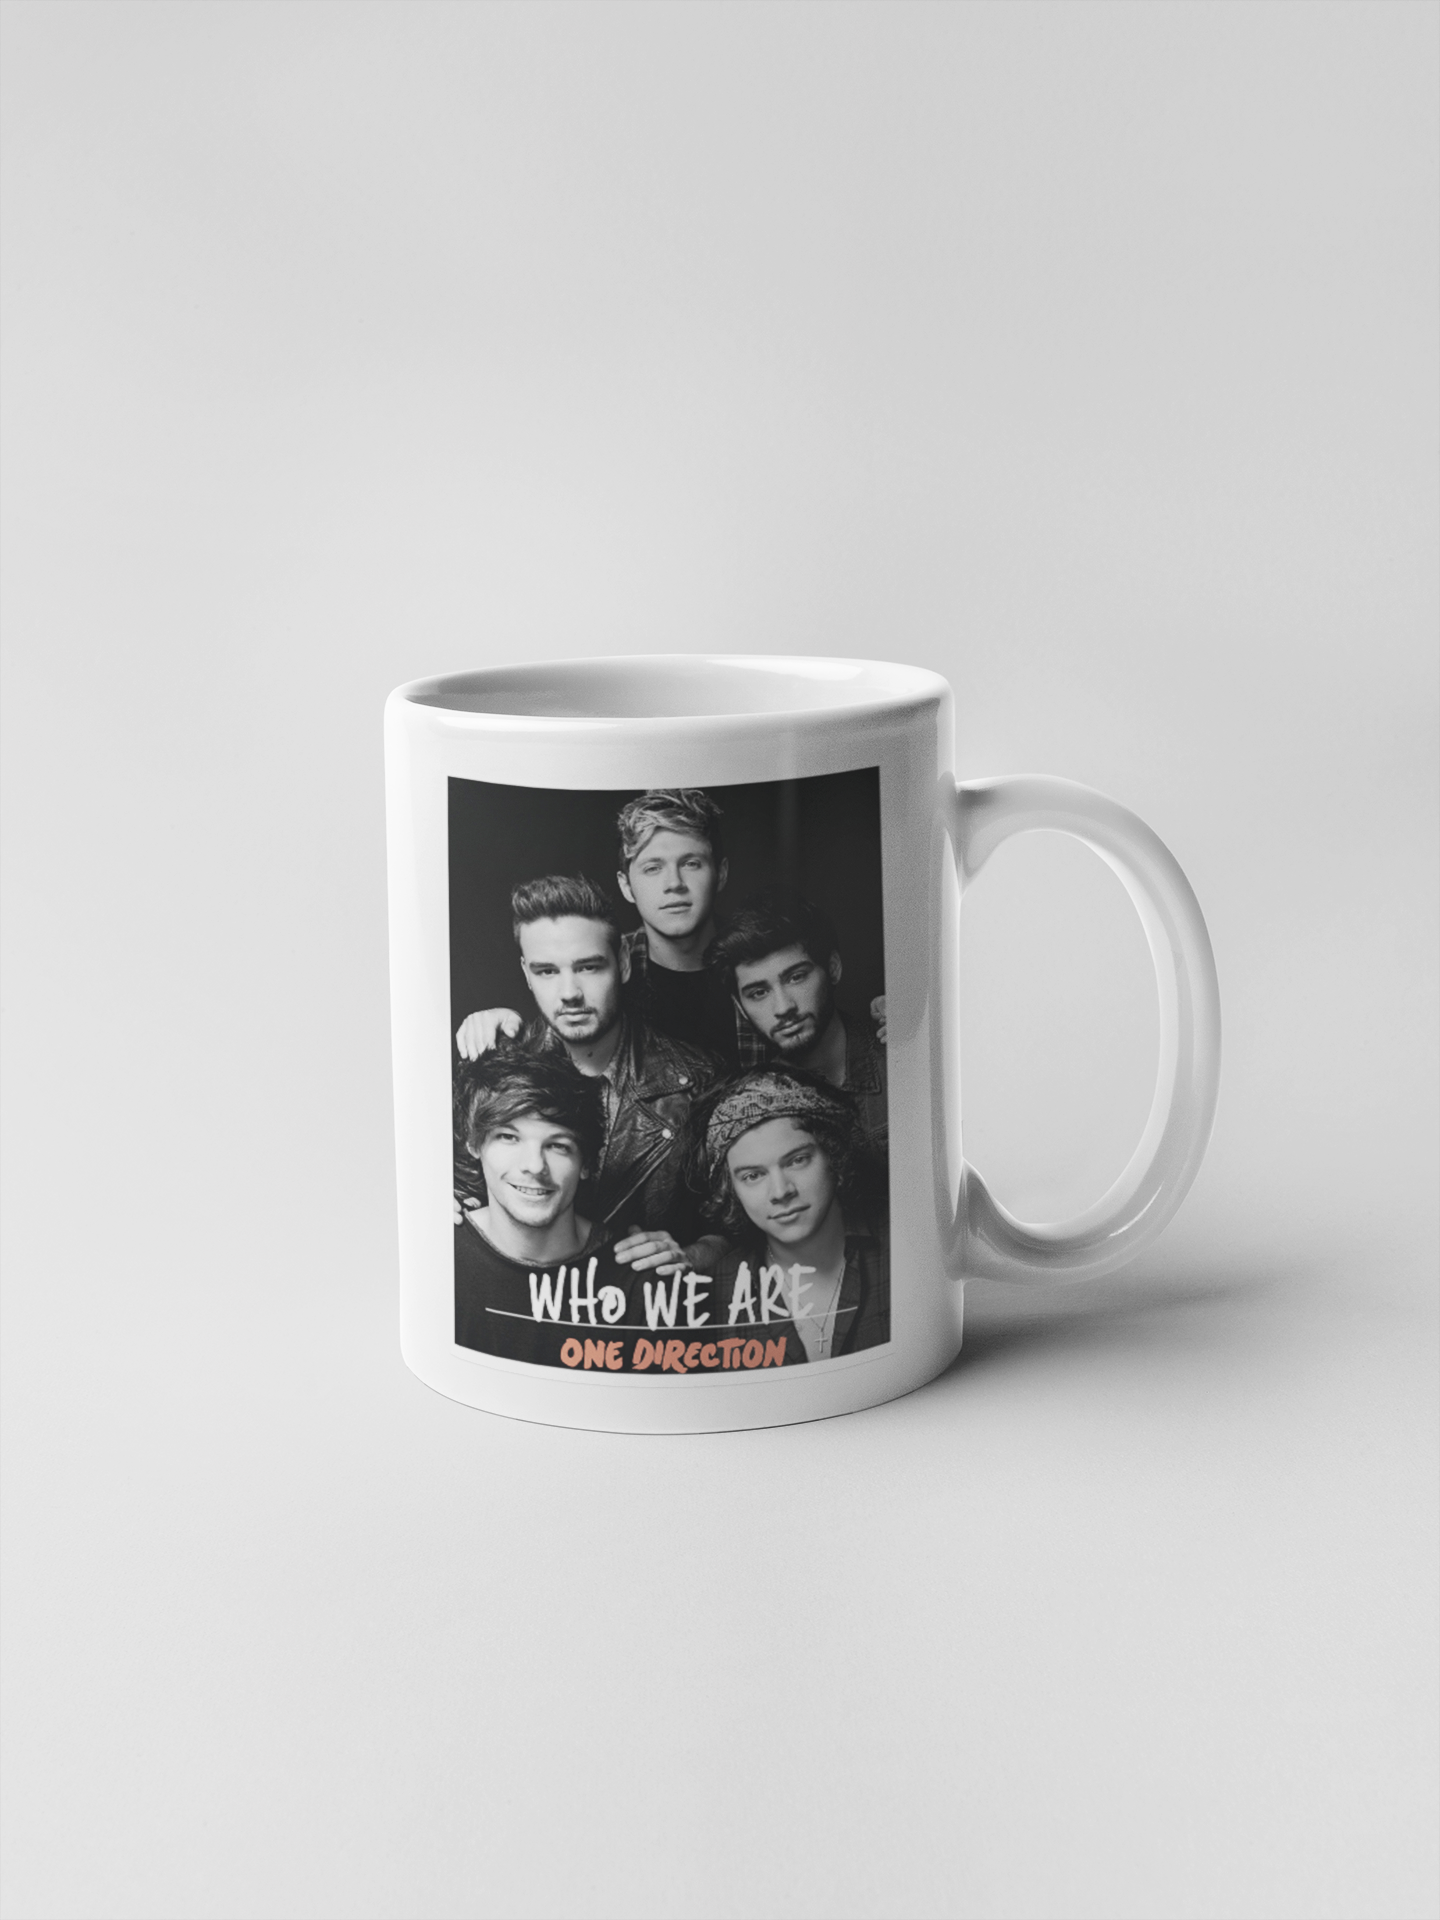 One Direction Who We Are Ceramic Coffee Mugs